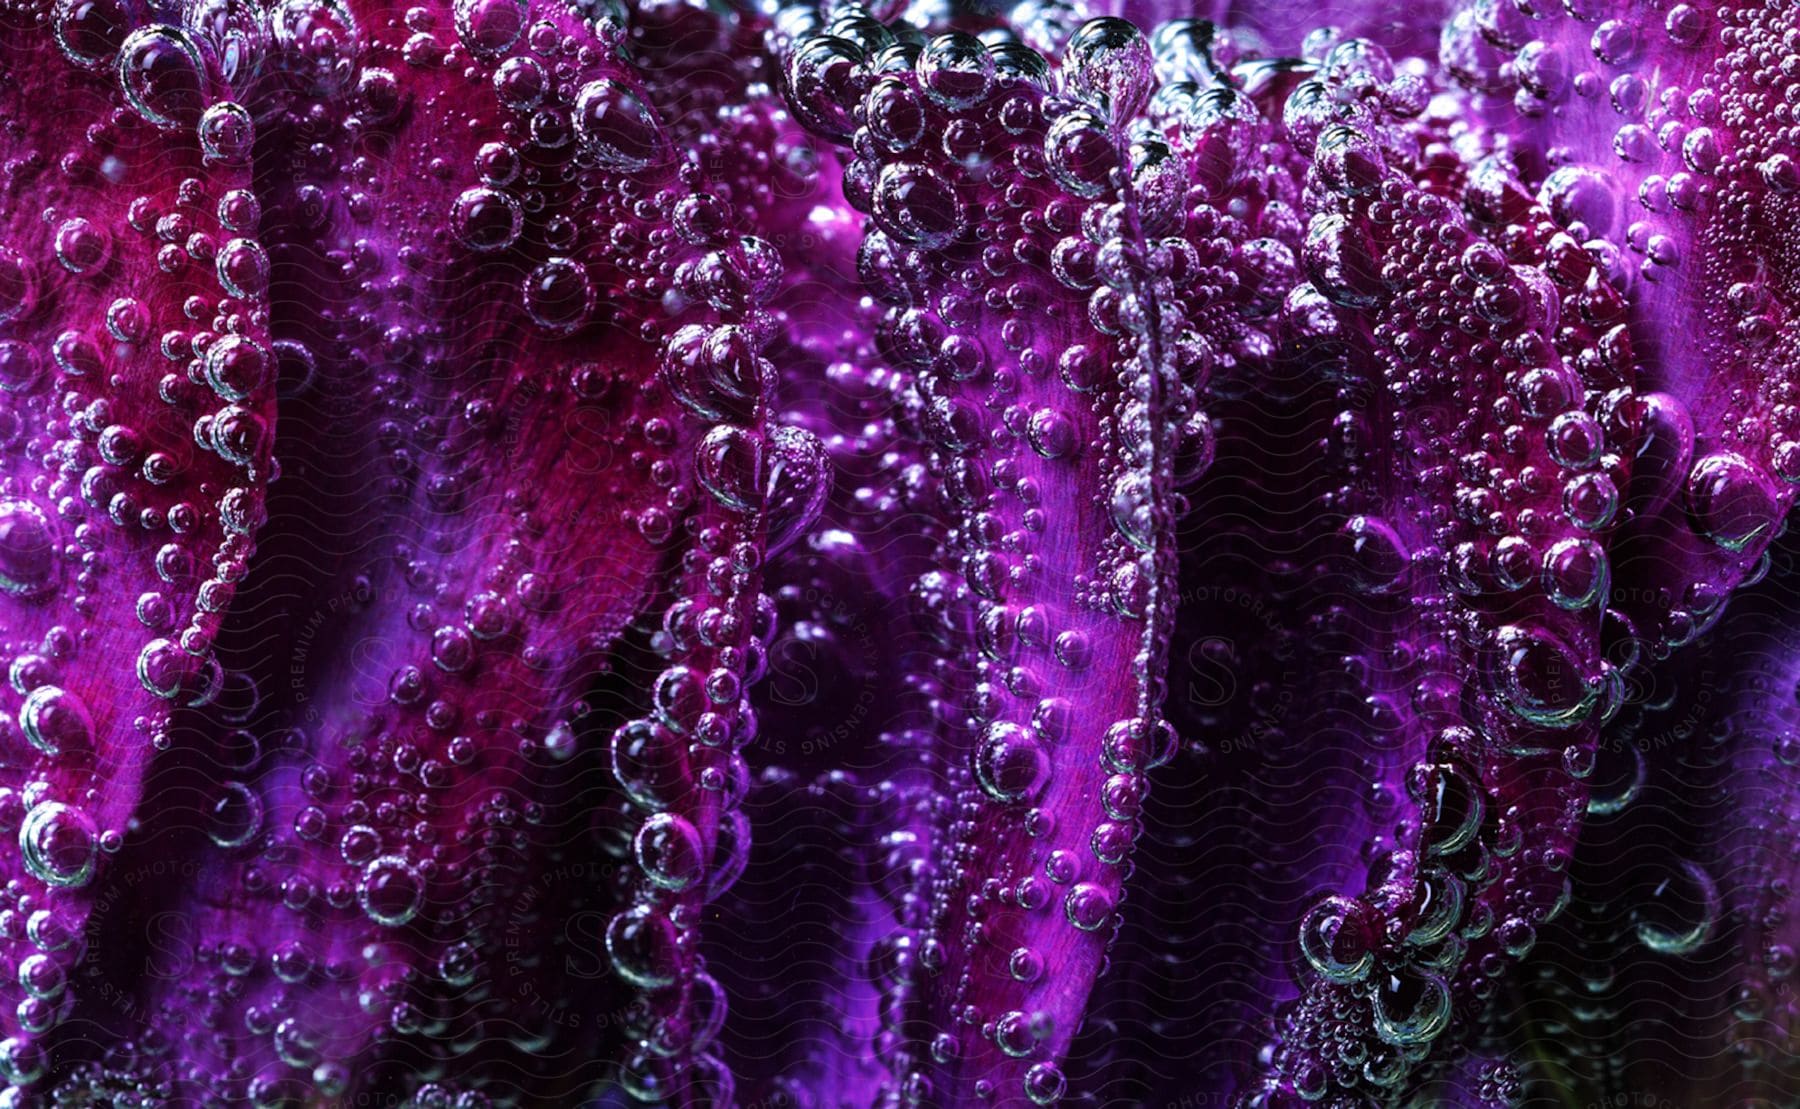 A closeup view of purple flower petals covered in water bubbles